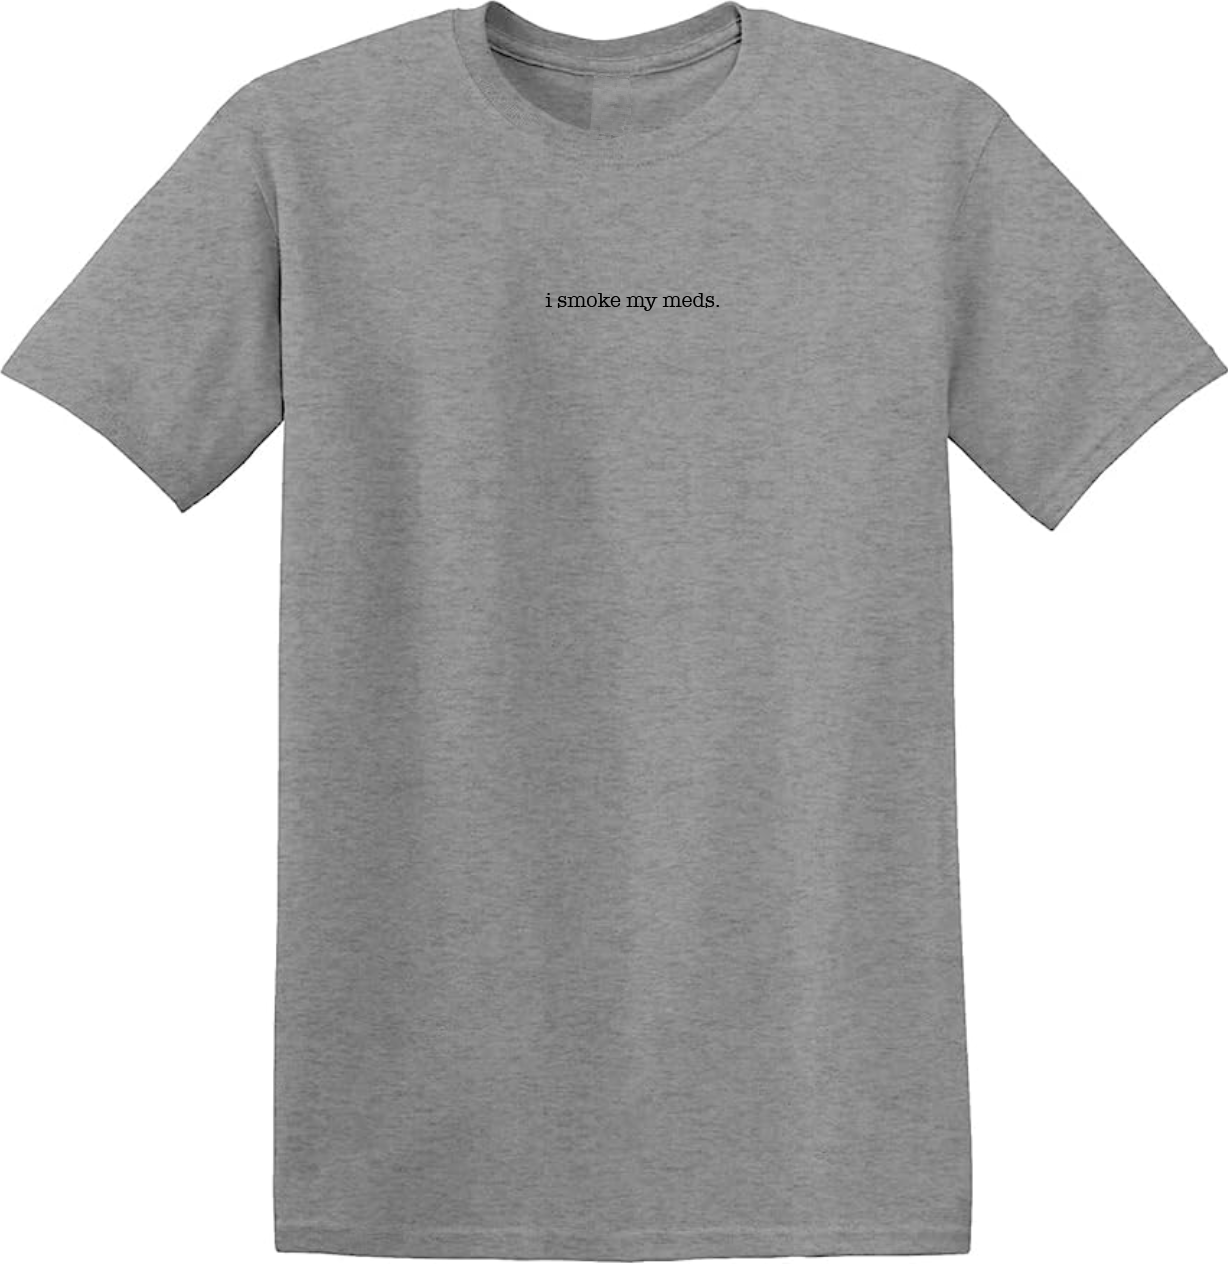 ISMM Classic Tee in Grey